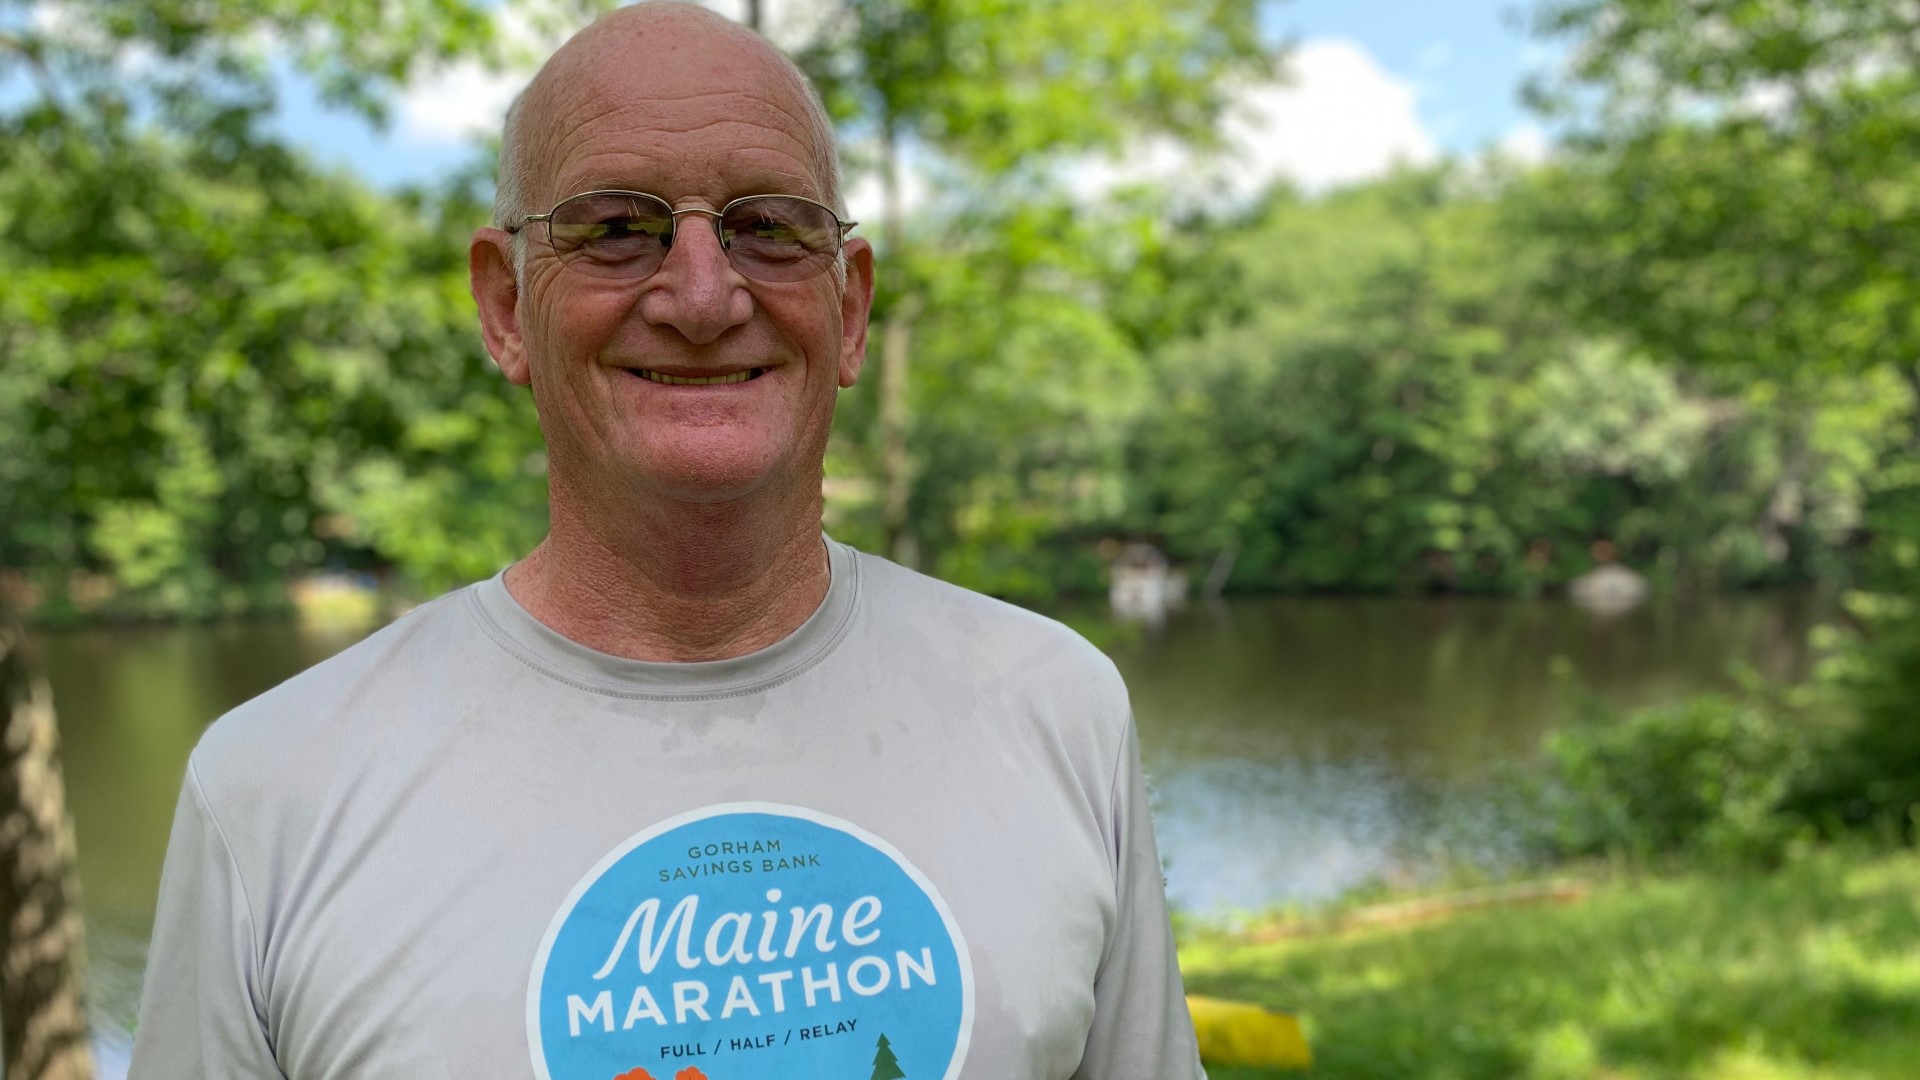 68-year-old Allyn Genest of Sanford has run 461 road races over the last decade and has finished each one.